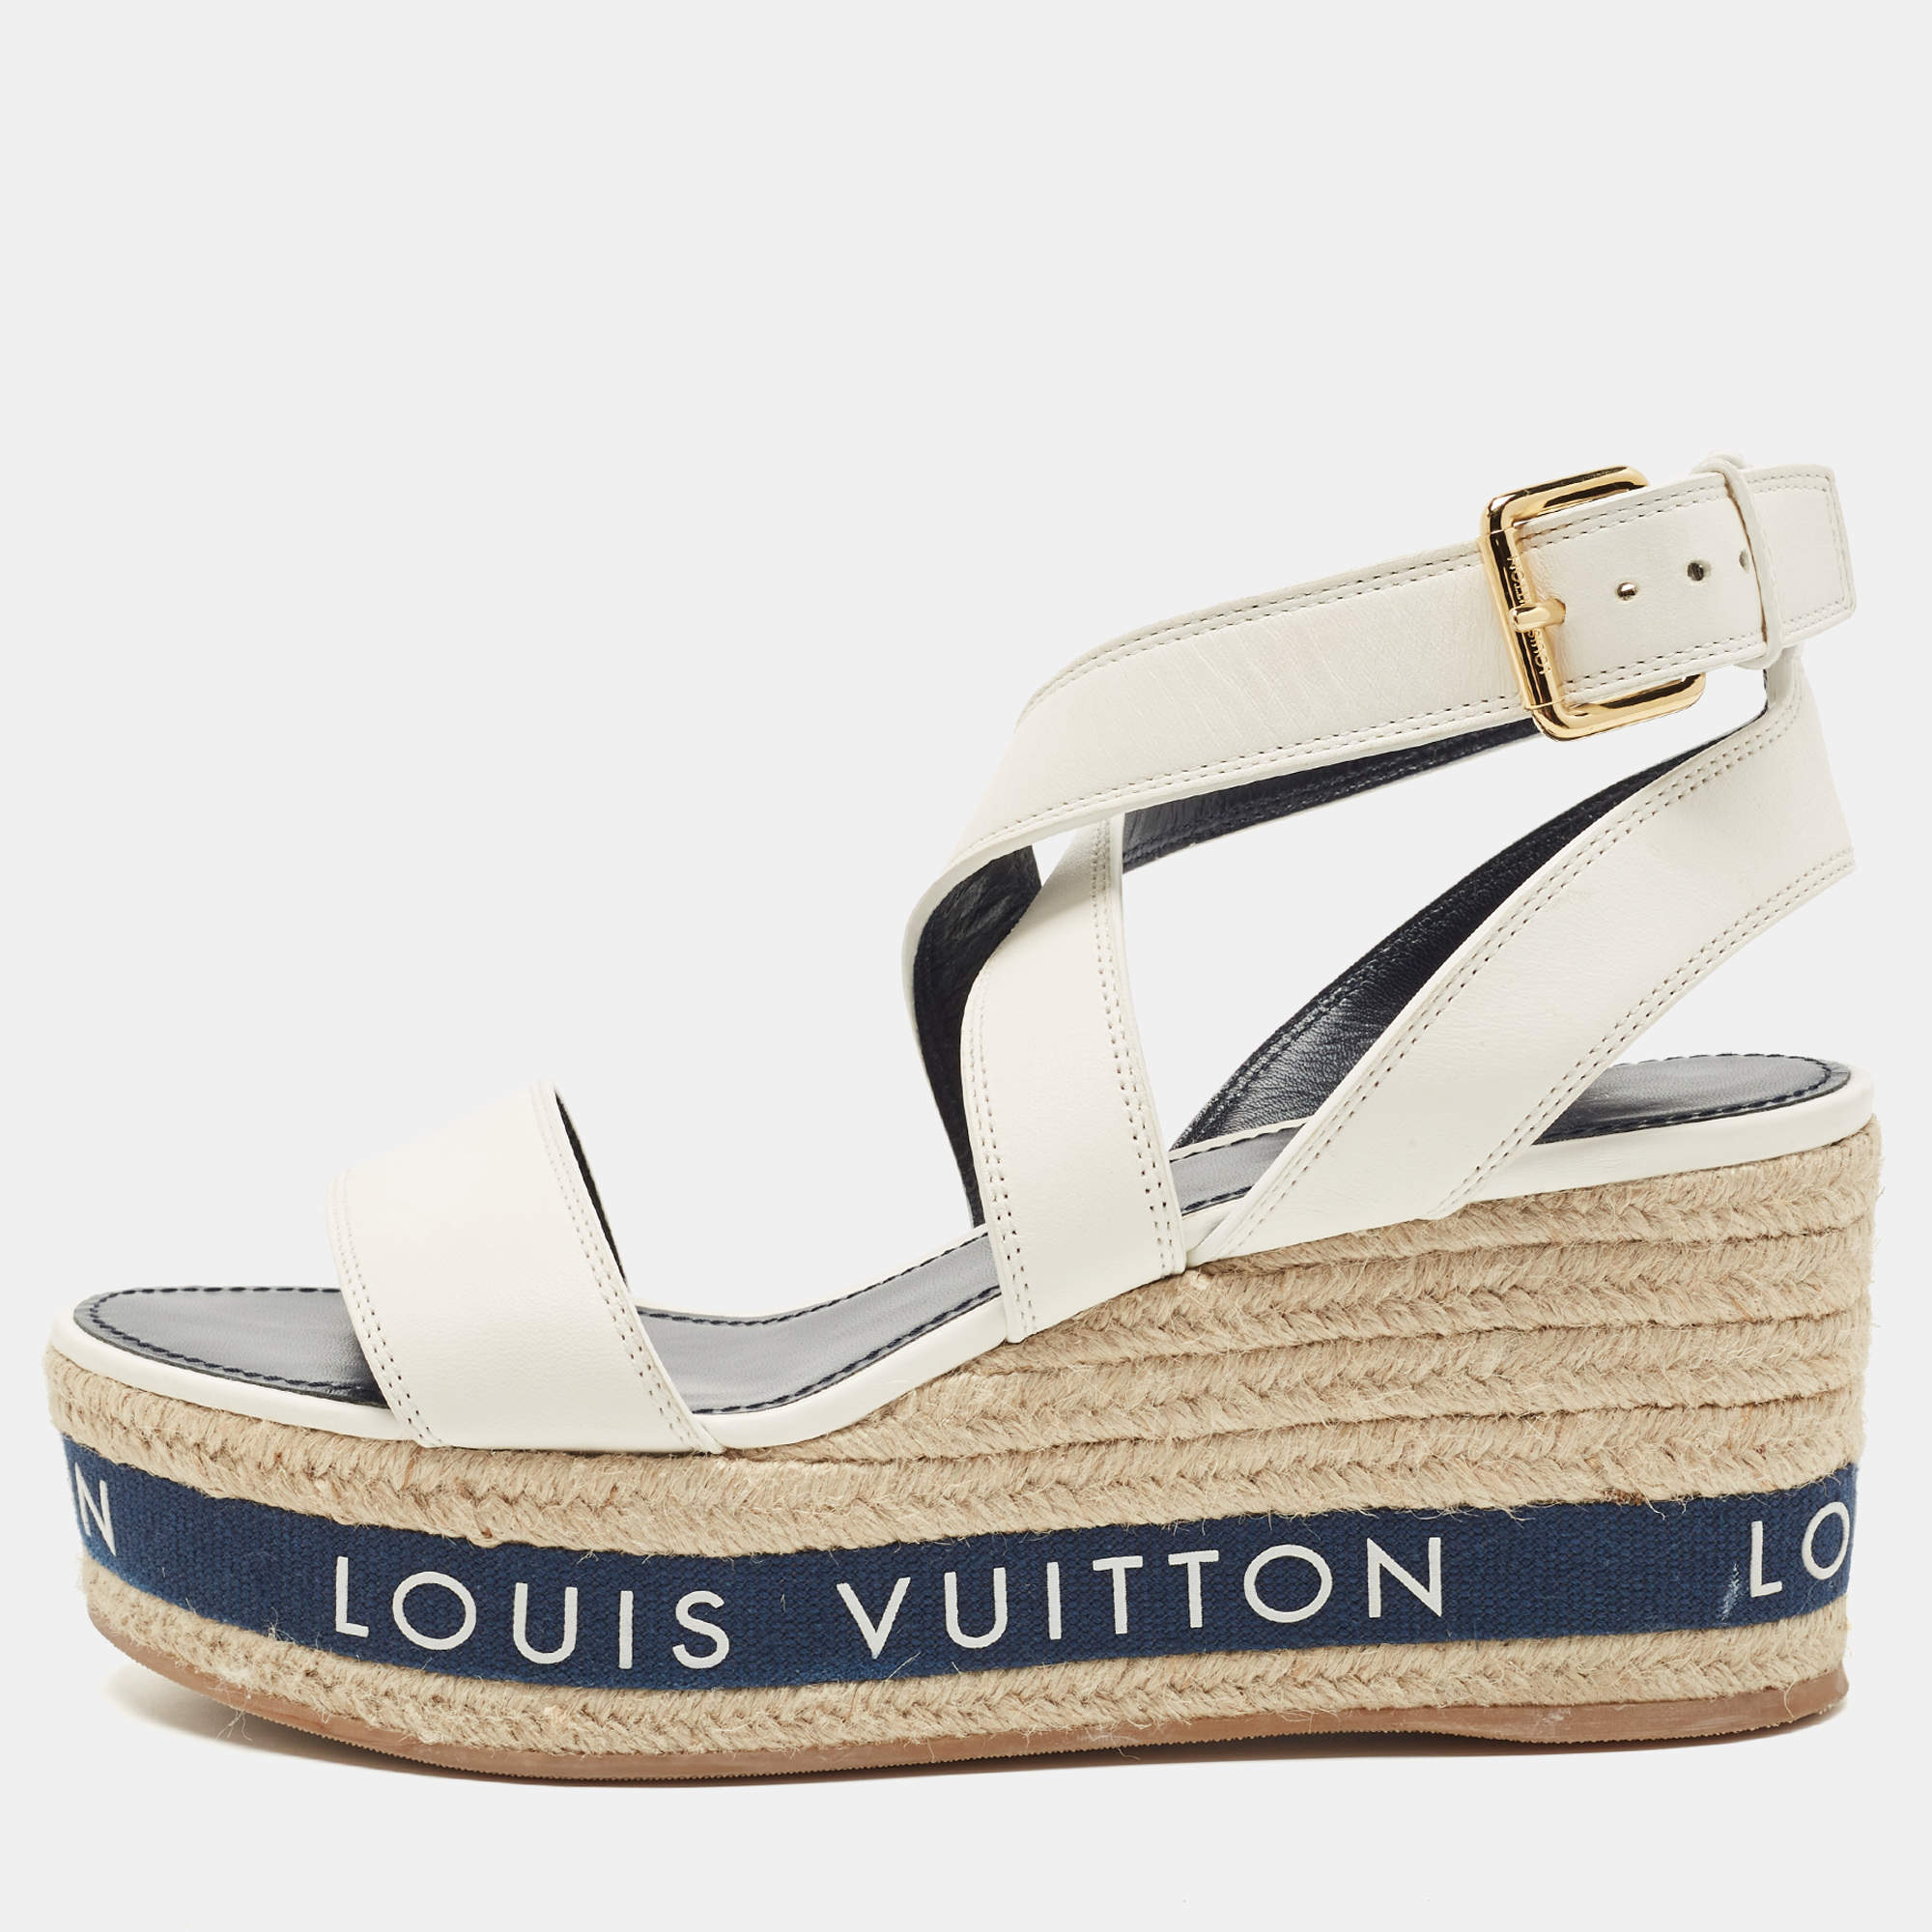 Louis Vuitton White Leather Wedge Ankle Sandals Size 41 Louis